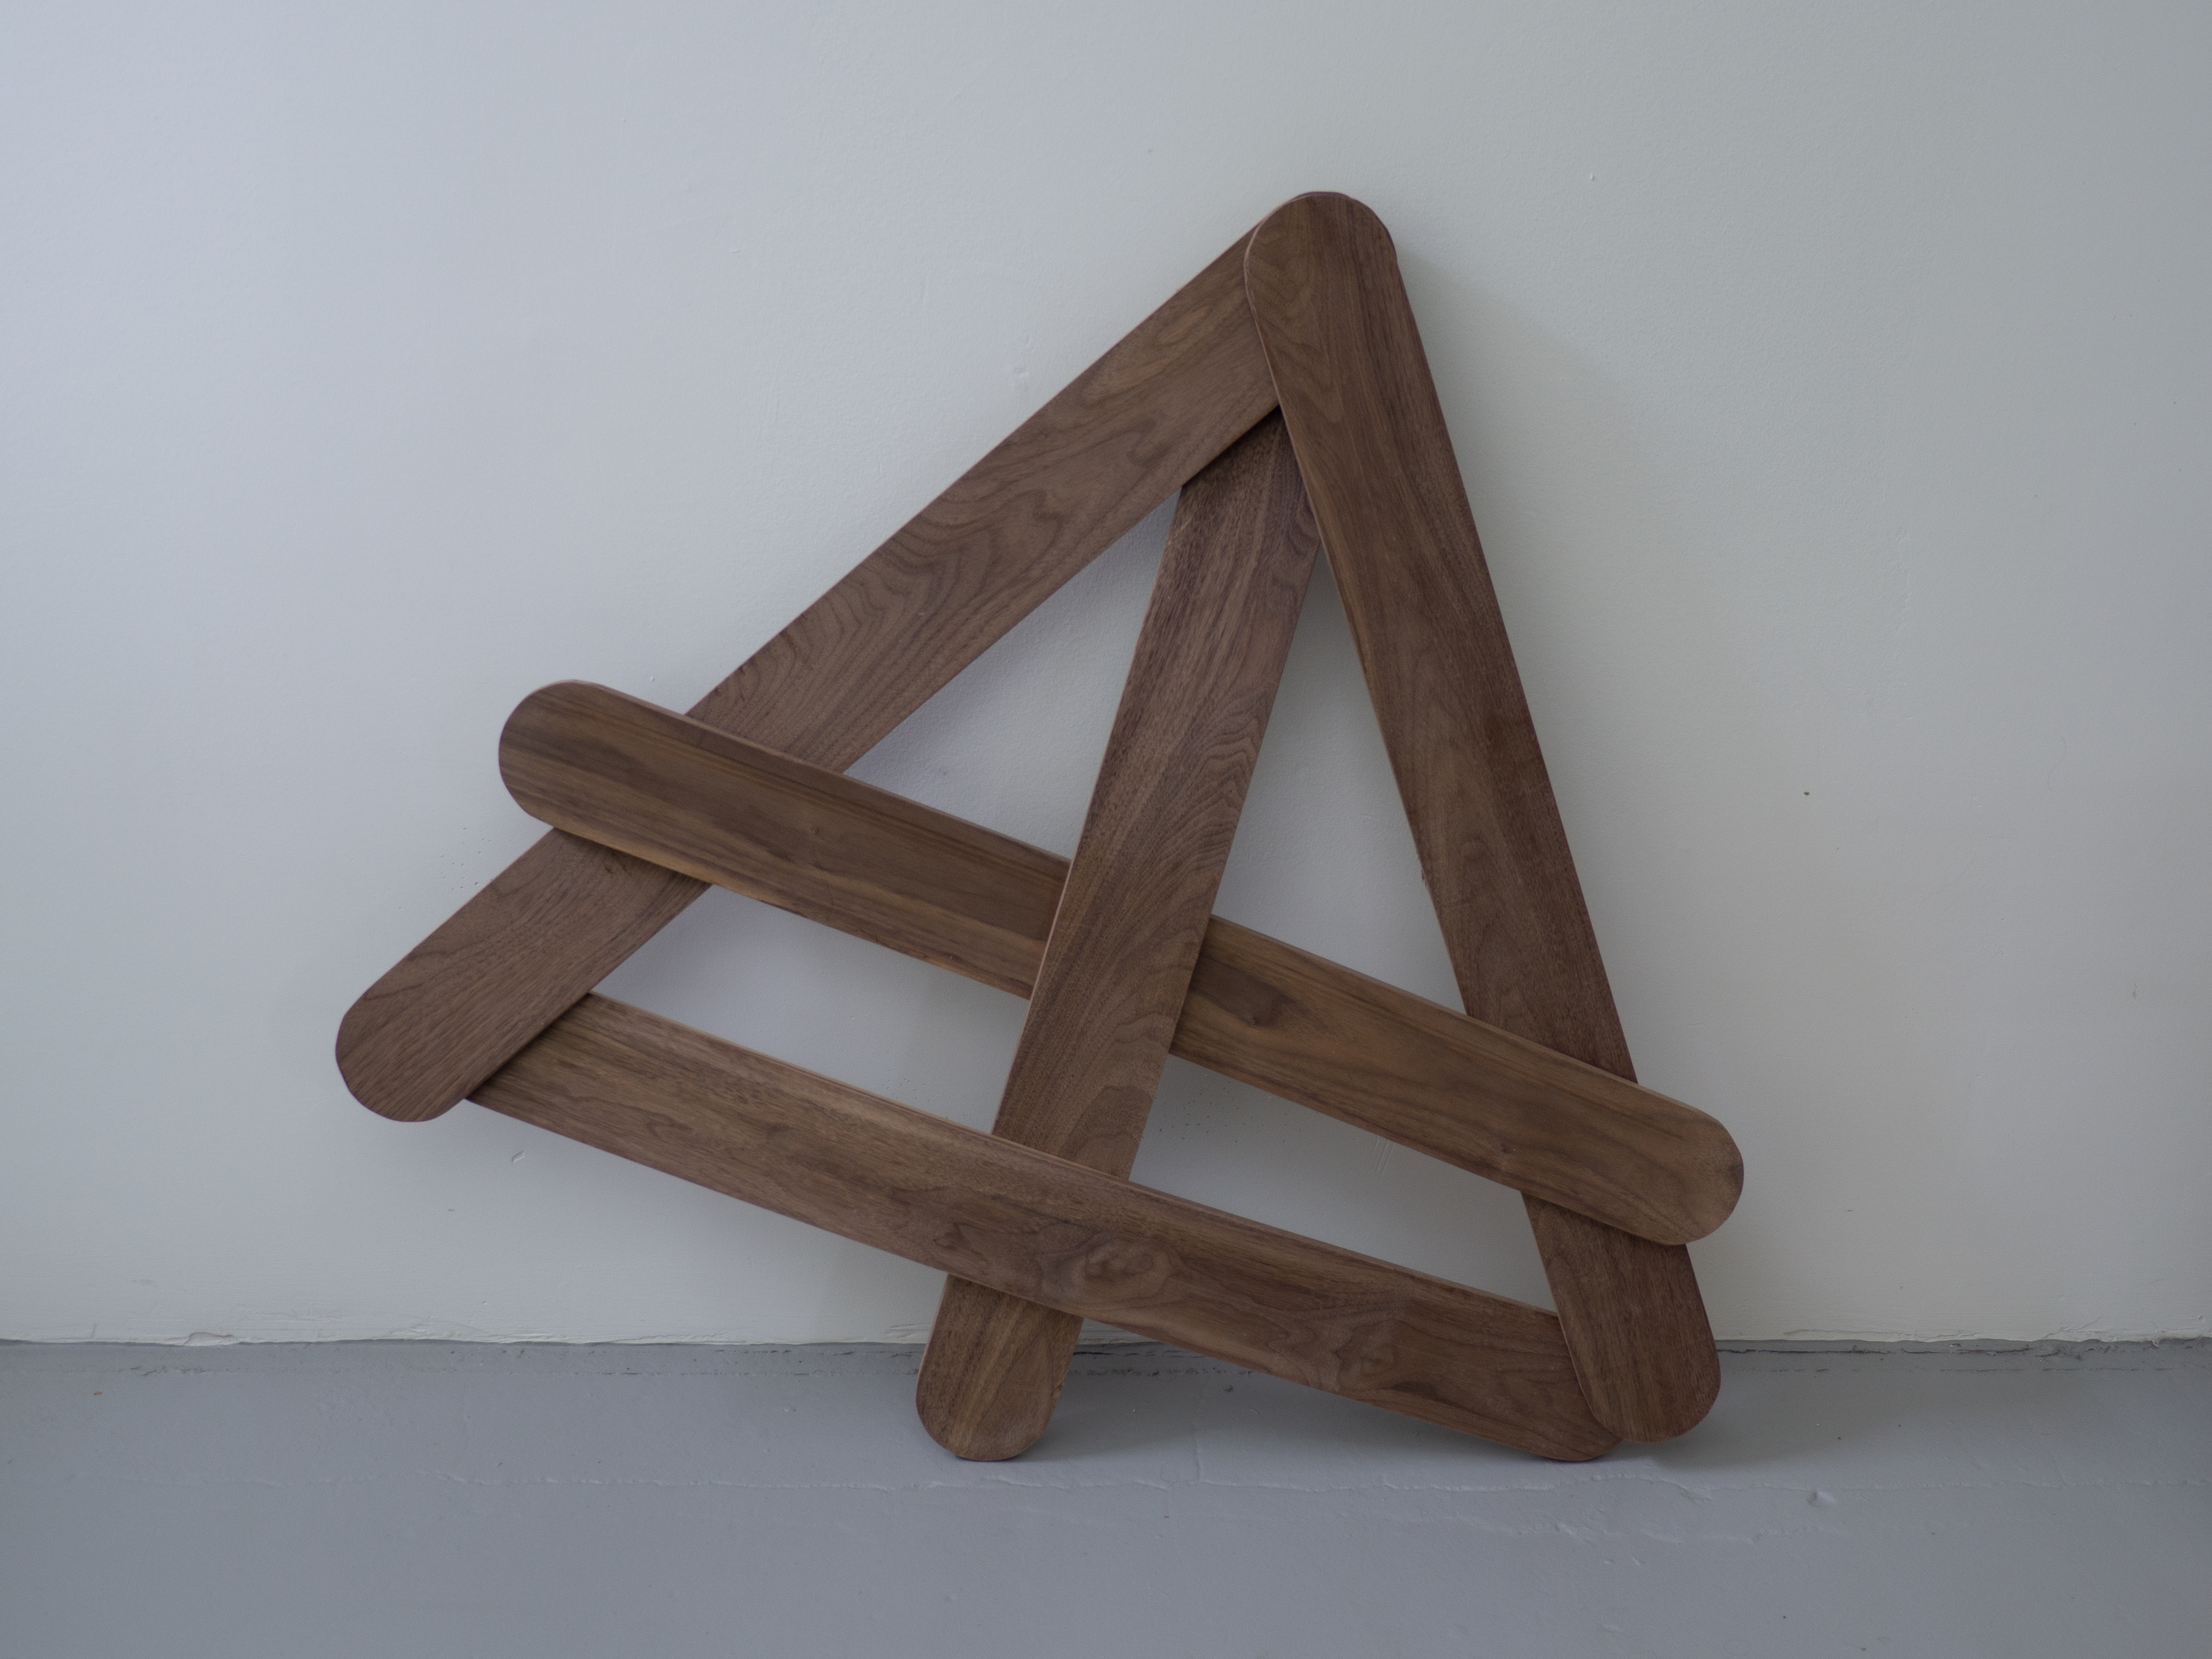 a group of wooden members are held in tension on and over each other making up a triangular shape